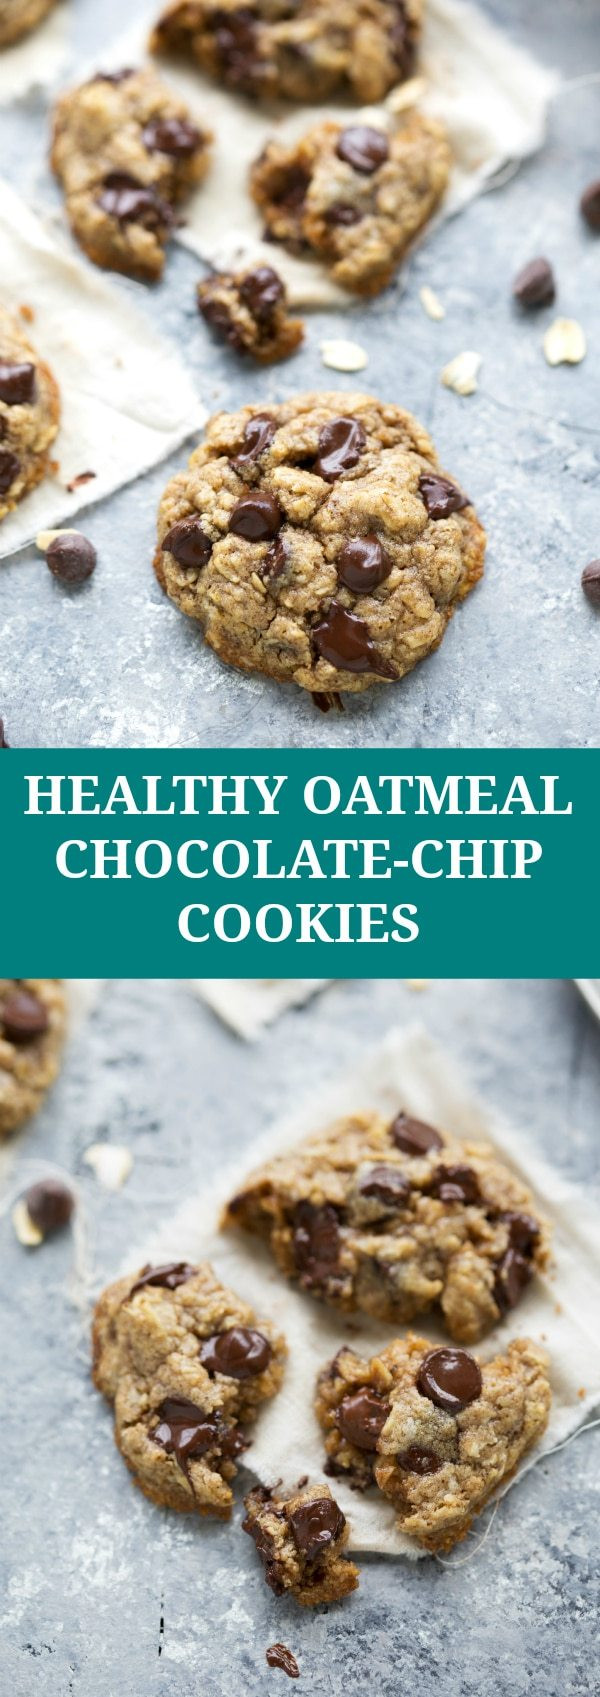 Choc Chip Oatmeal Cookies Healthy
 The BEST healthy oatmeal chocolate chip cookies Chelsea